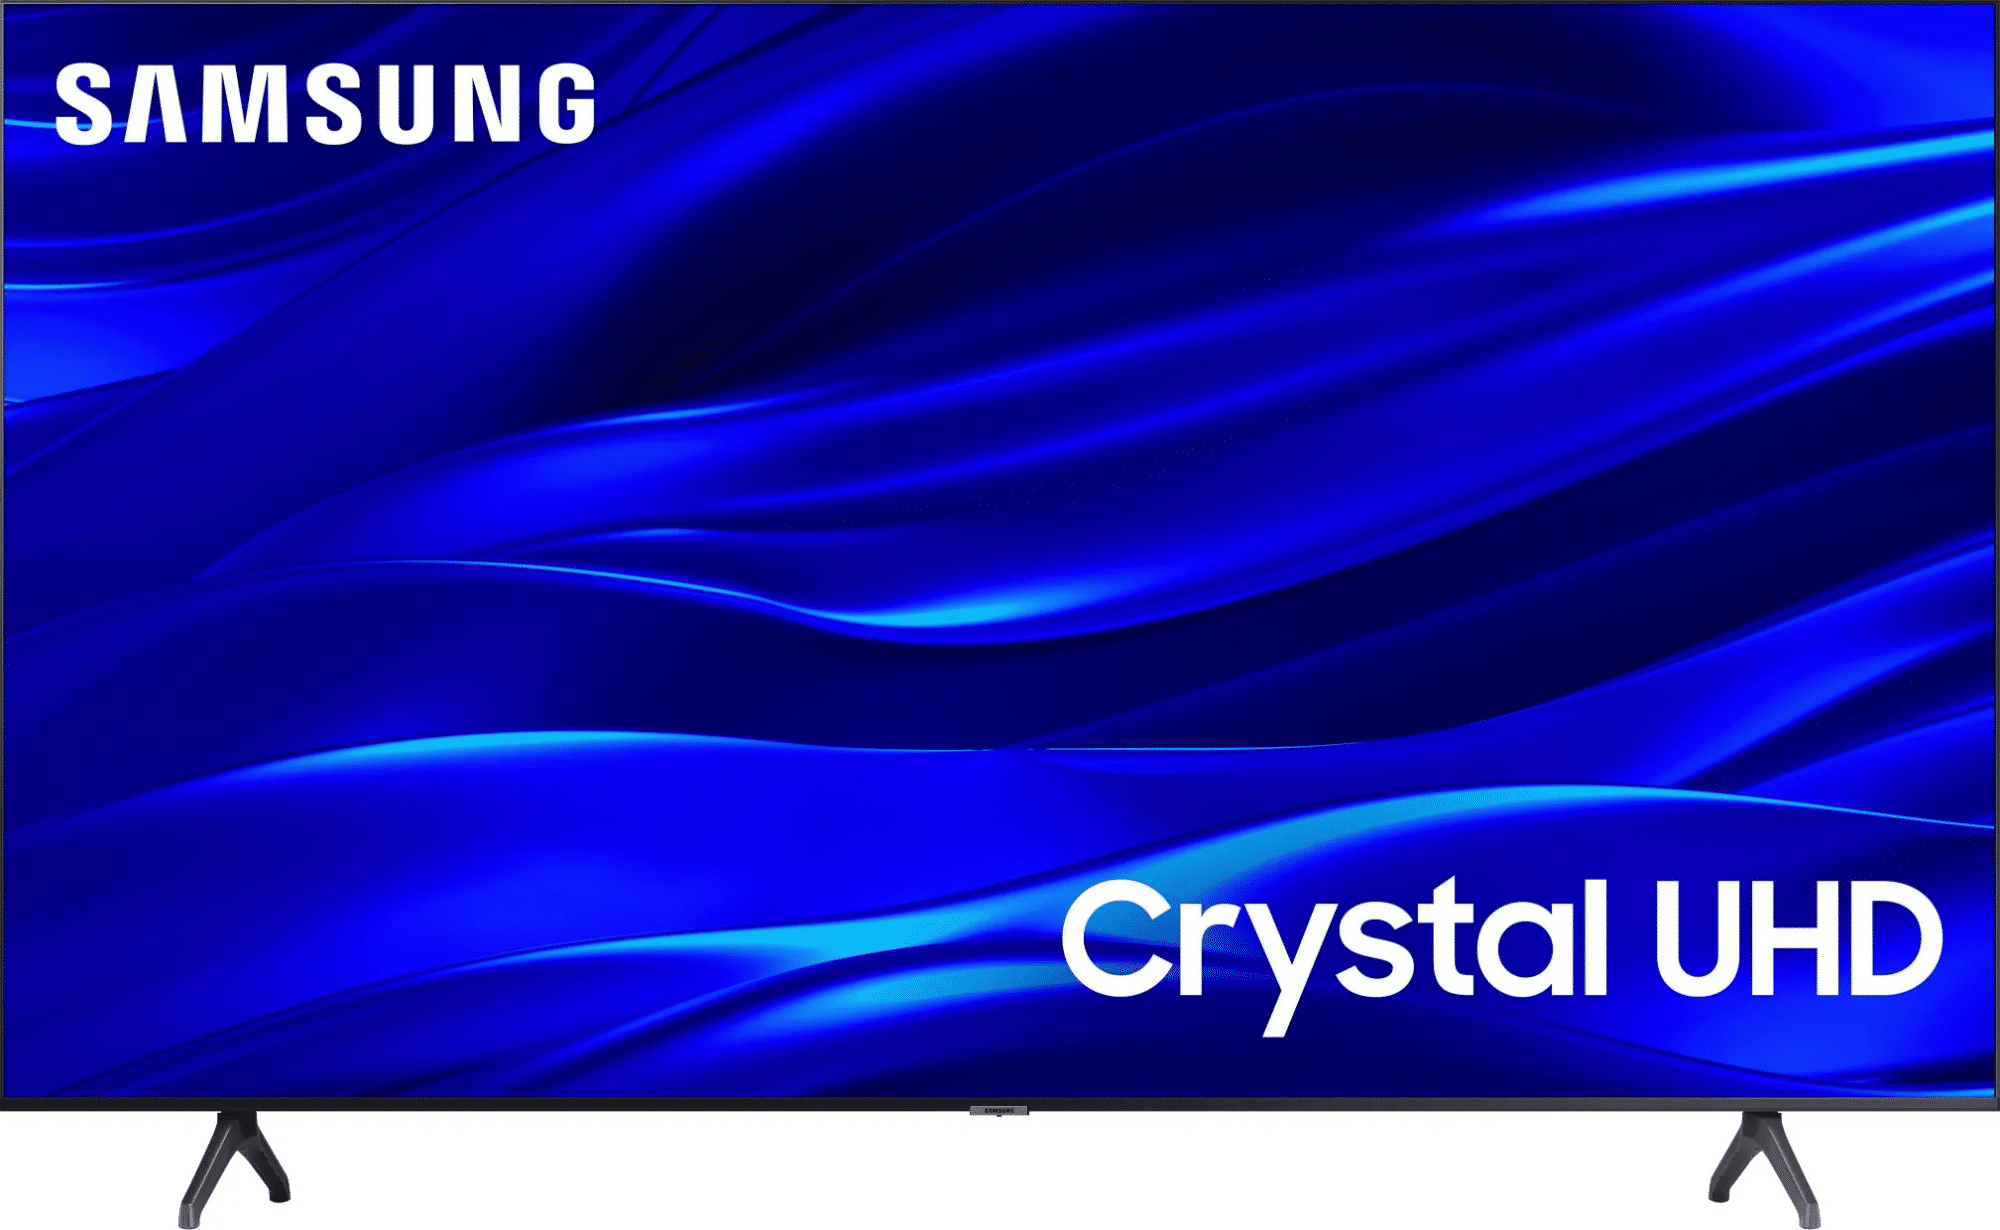 samsung's eye catching tvs & connected gadgets with motion data